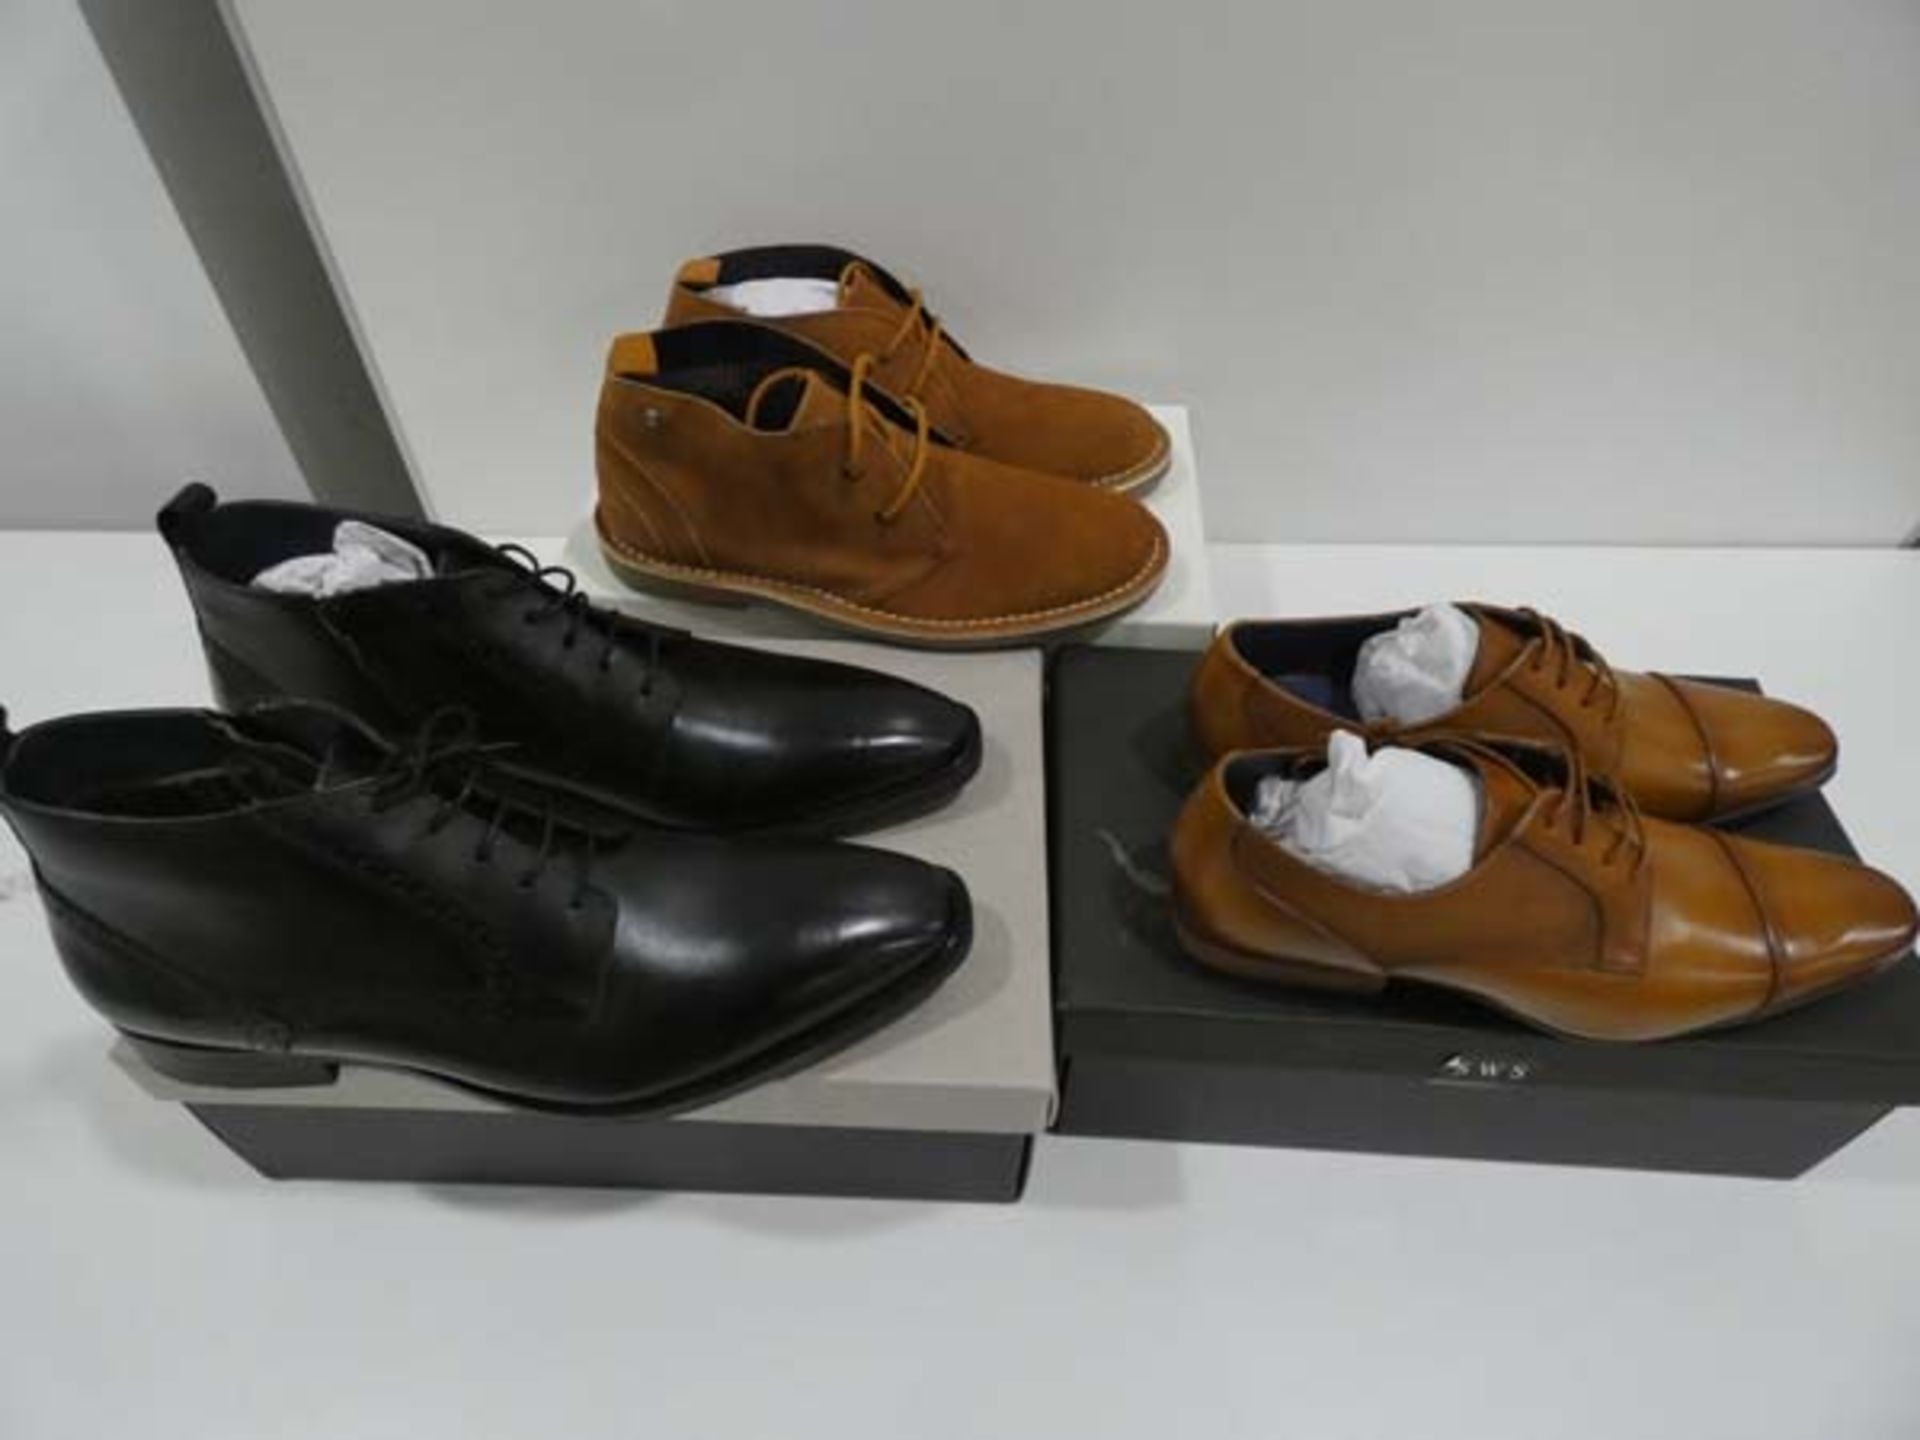 Pair of Ben Sherman suede boots size 7, pair of Scott Williams gold size EU 40 leather shoes, and - Image 2 of 2